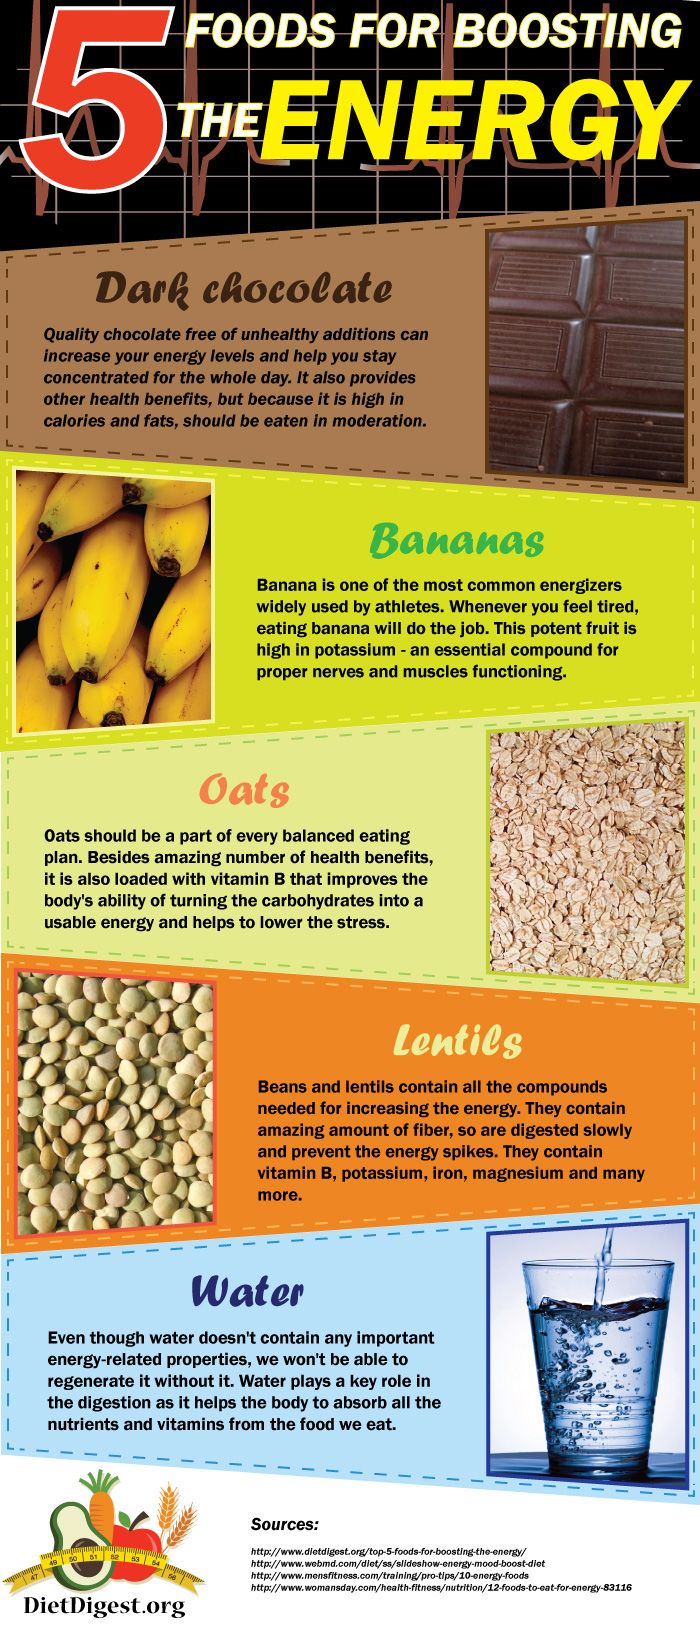 5 Foods That Will Boost Your Energy - Infographic